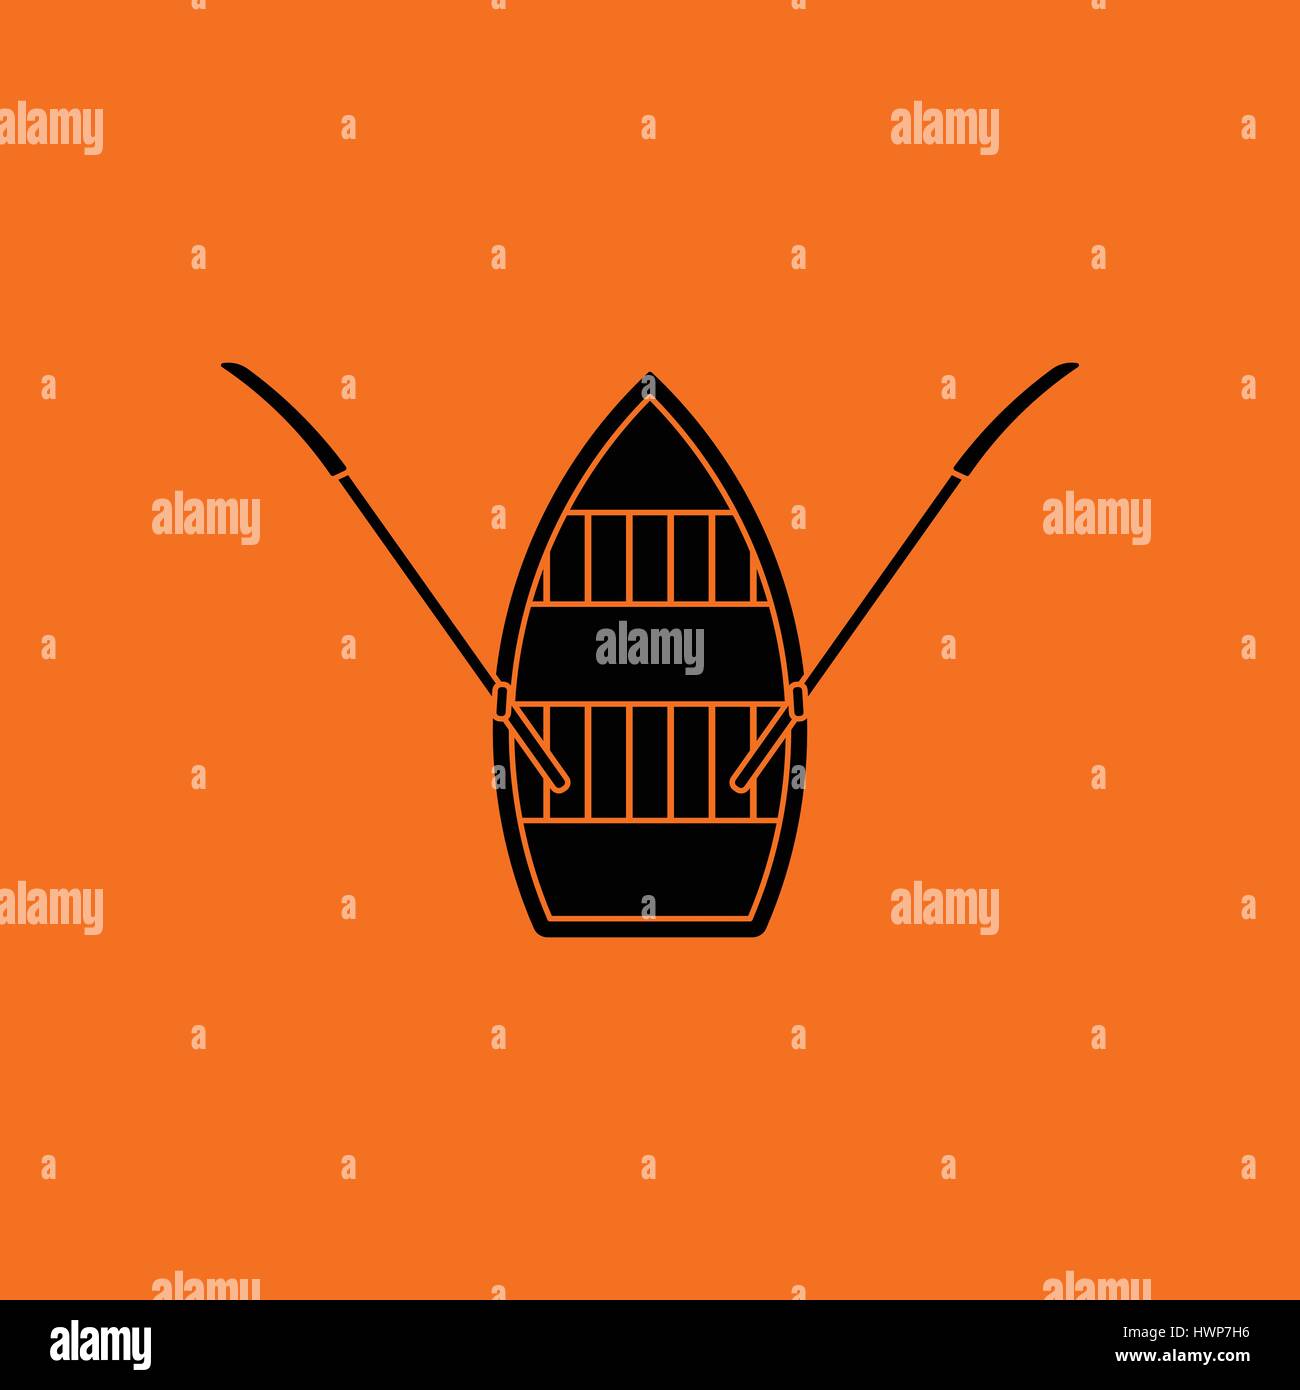 Paddle boat icon. Orange background with black. Vector illustration. Stock Vector